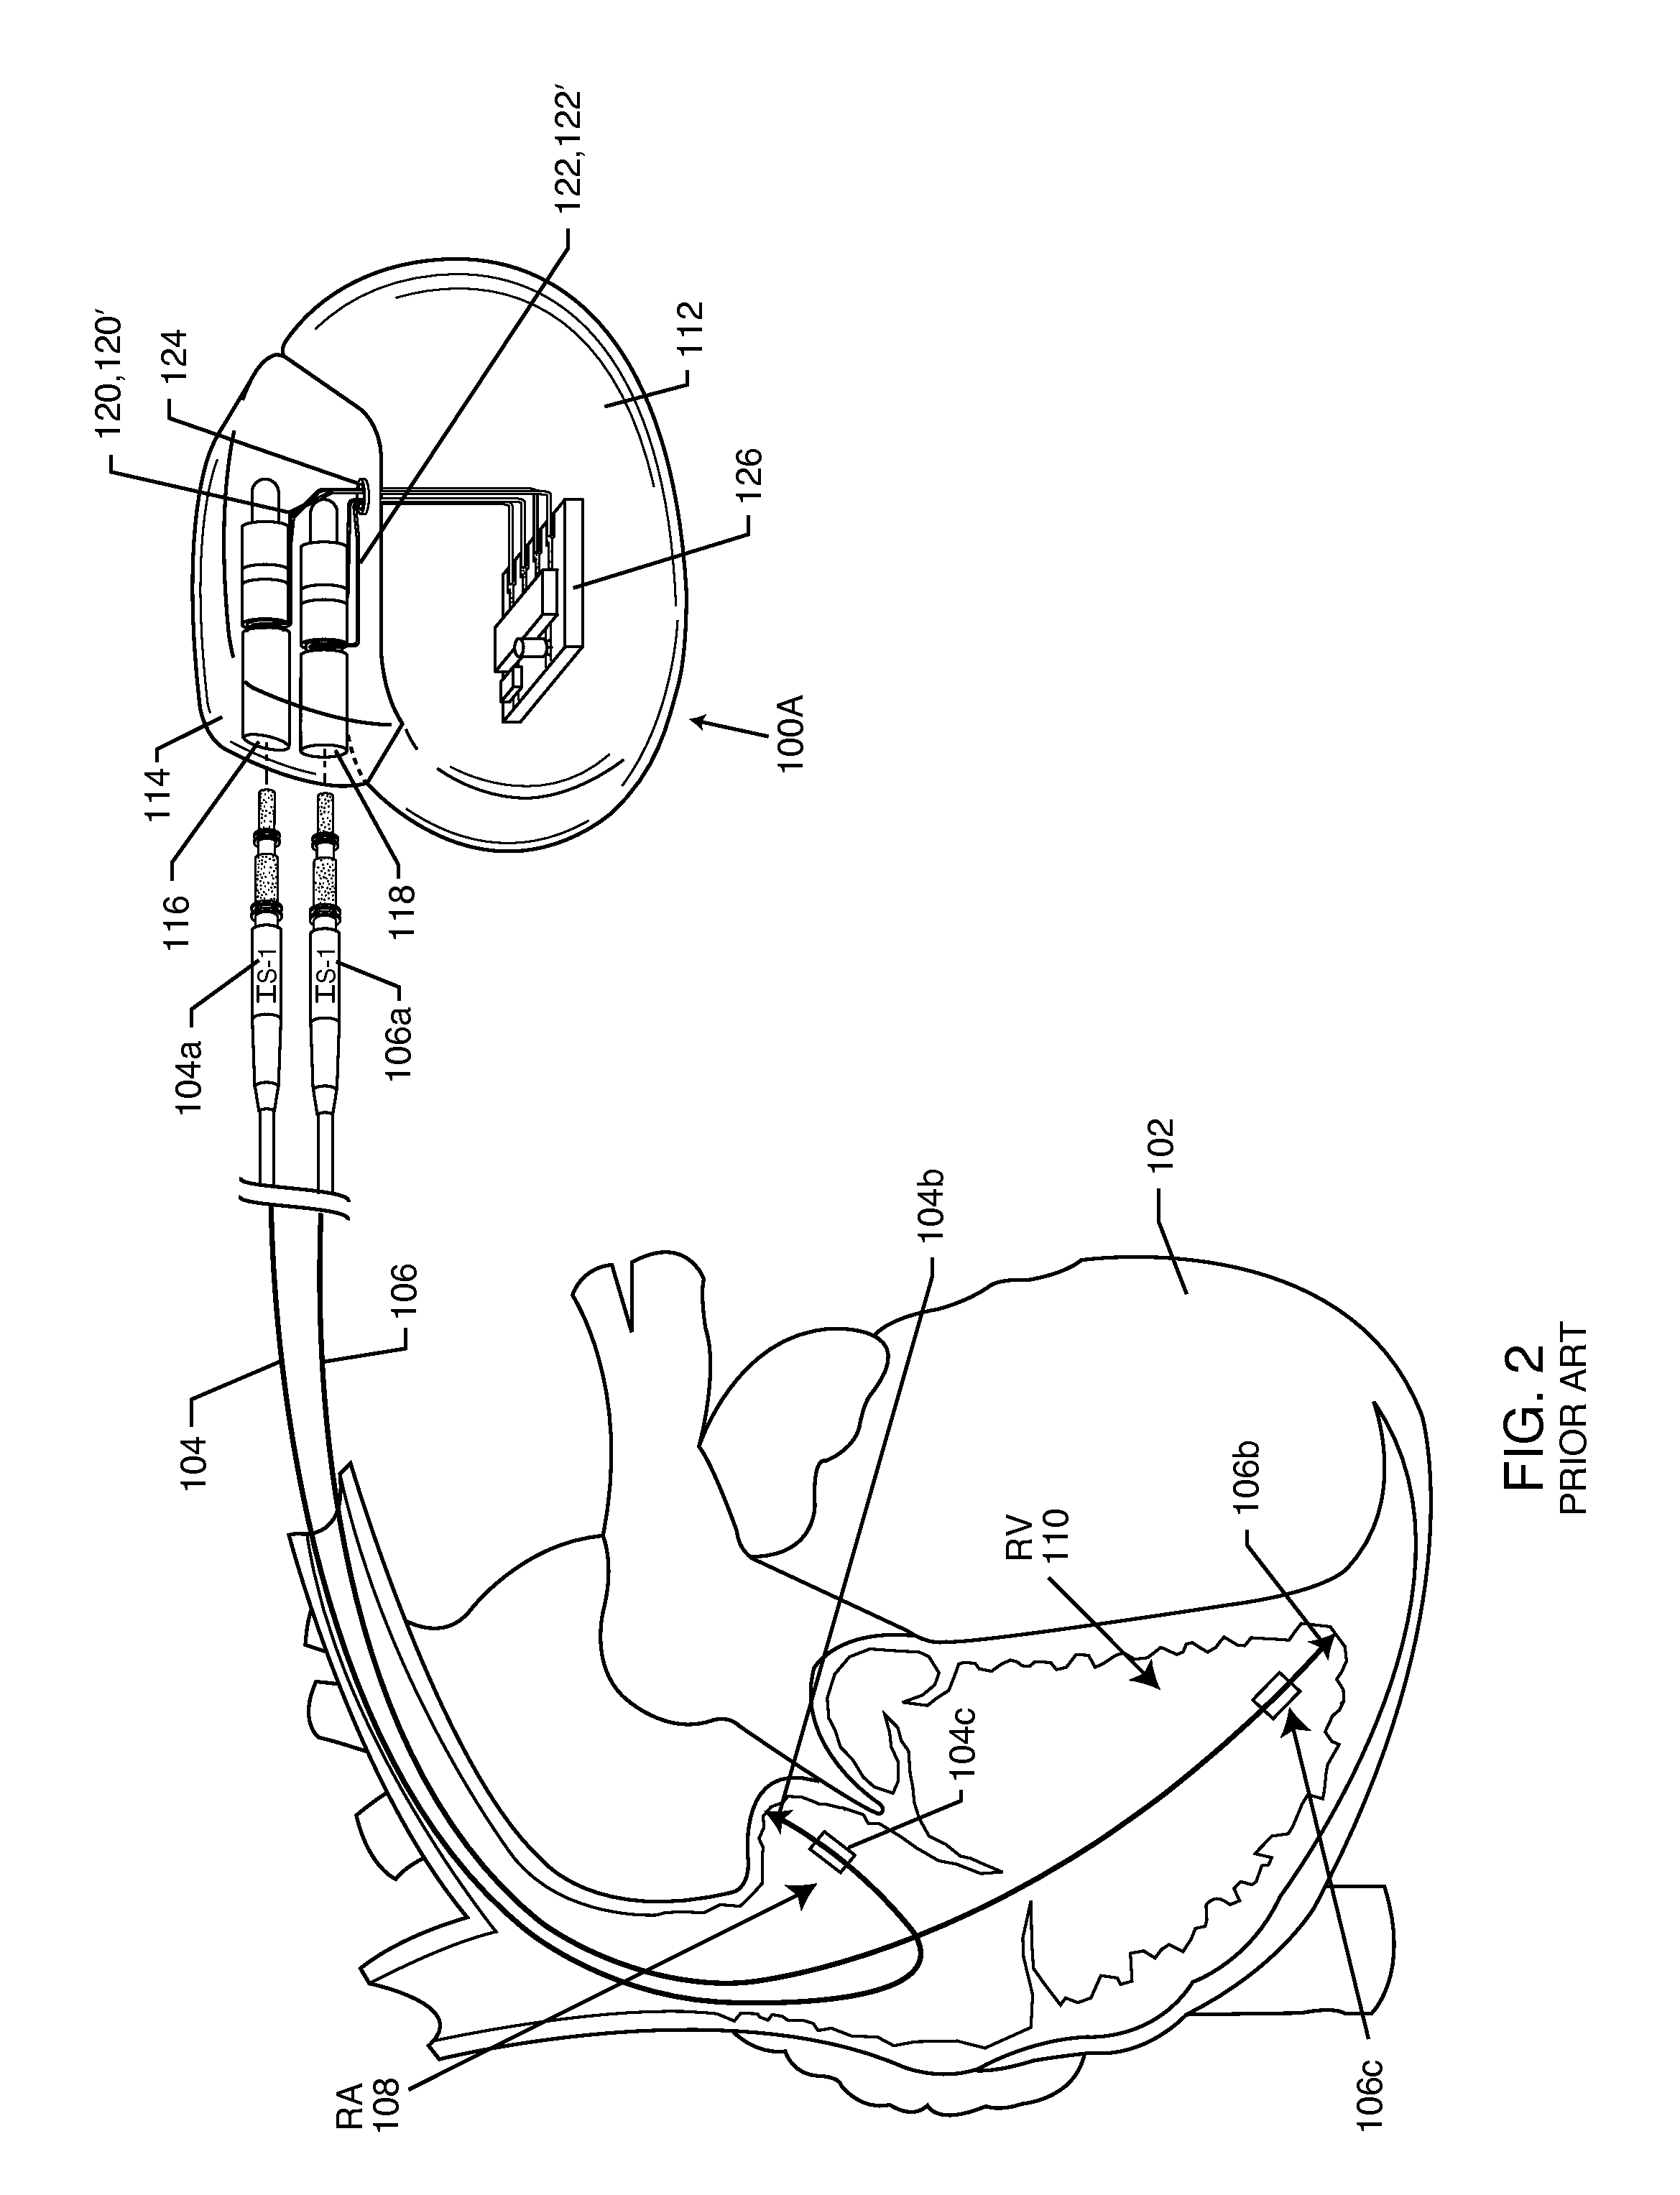 Secondary header for an implantable medical device incorporating an ISO DF4 connector and connector cavity and/or an IS4 connector and connector cavity